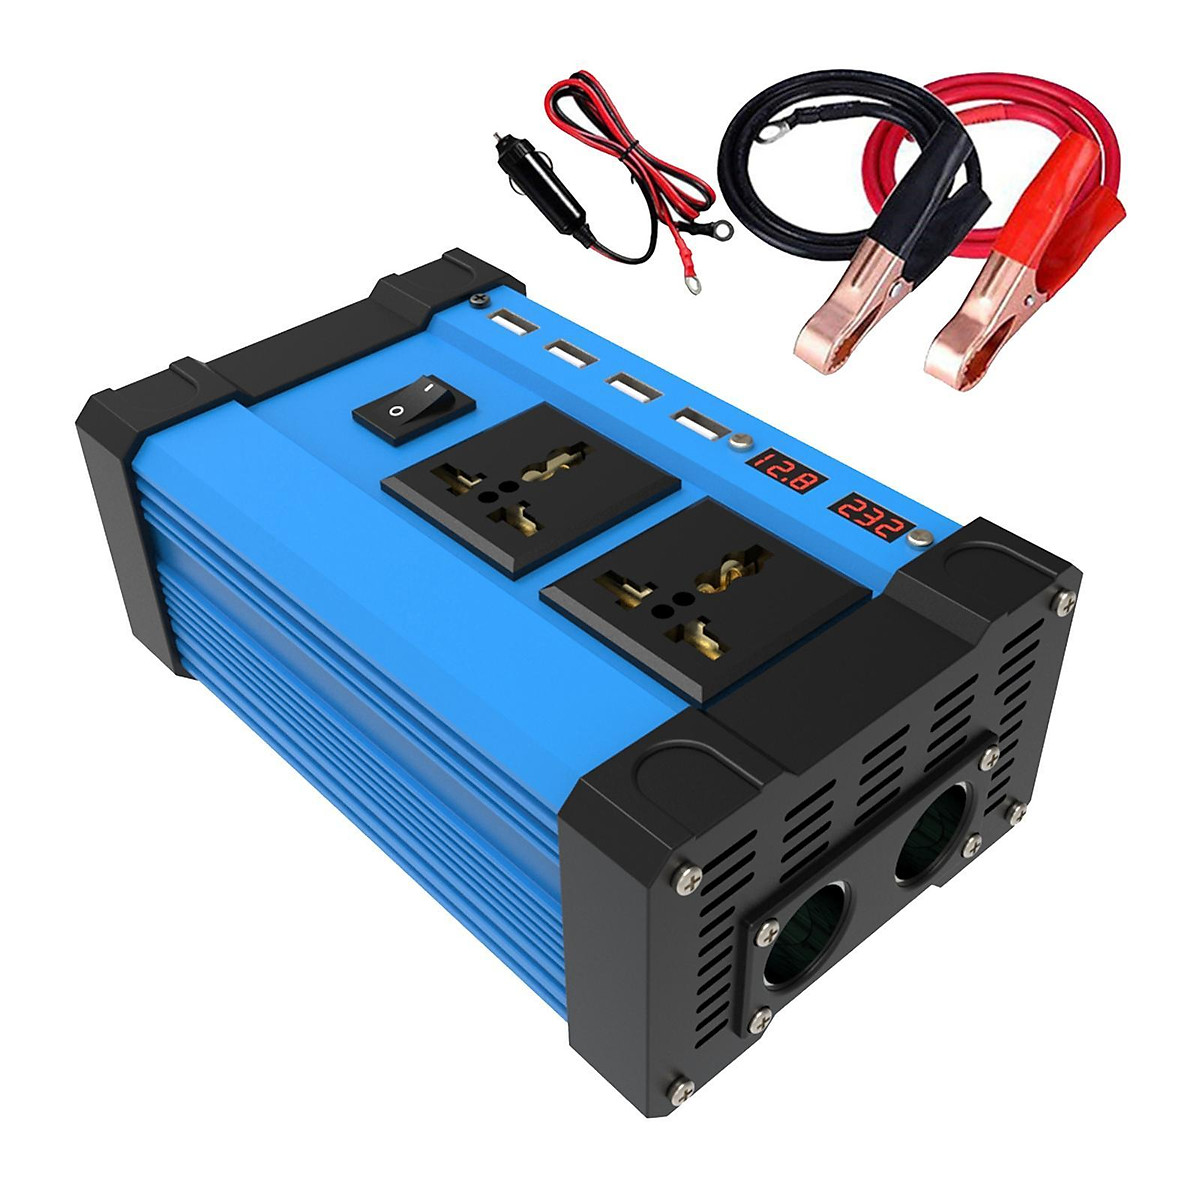 Mua 300W DC 12V /220V Inverter with  USB Charging Ports, Power  Converter with 2 AC Outlets Battery Clip Charger, Car Adapter - 110V tại  Magideal